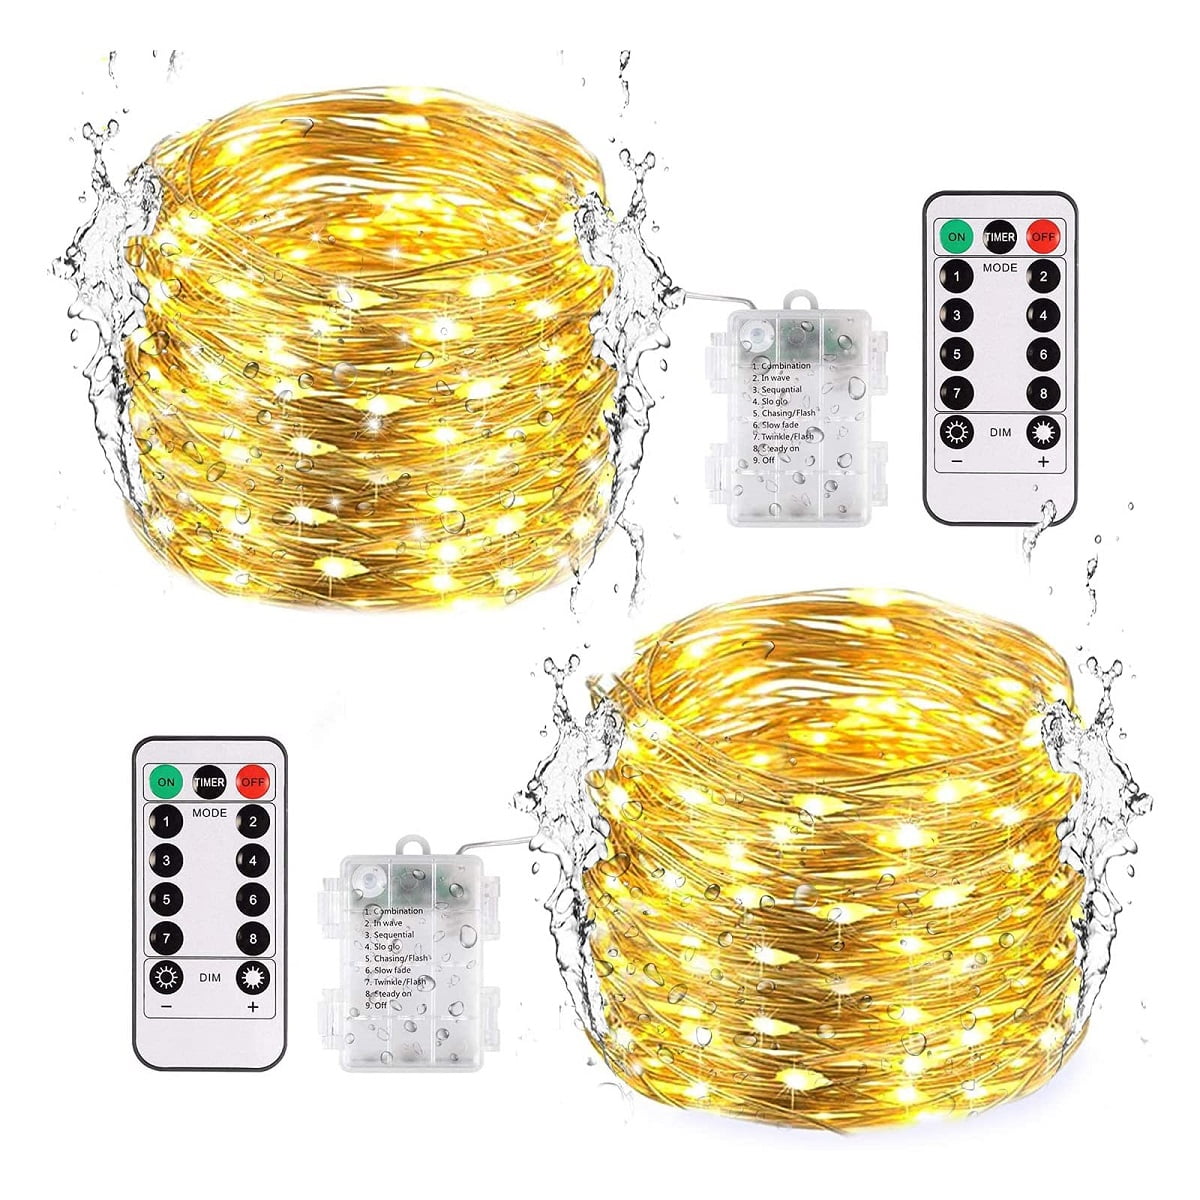 20/50/100 LED String Copper Wire Fairy Lights Battery Operated Waterproof New 